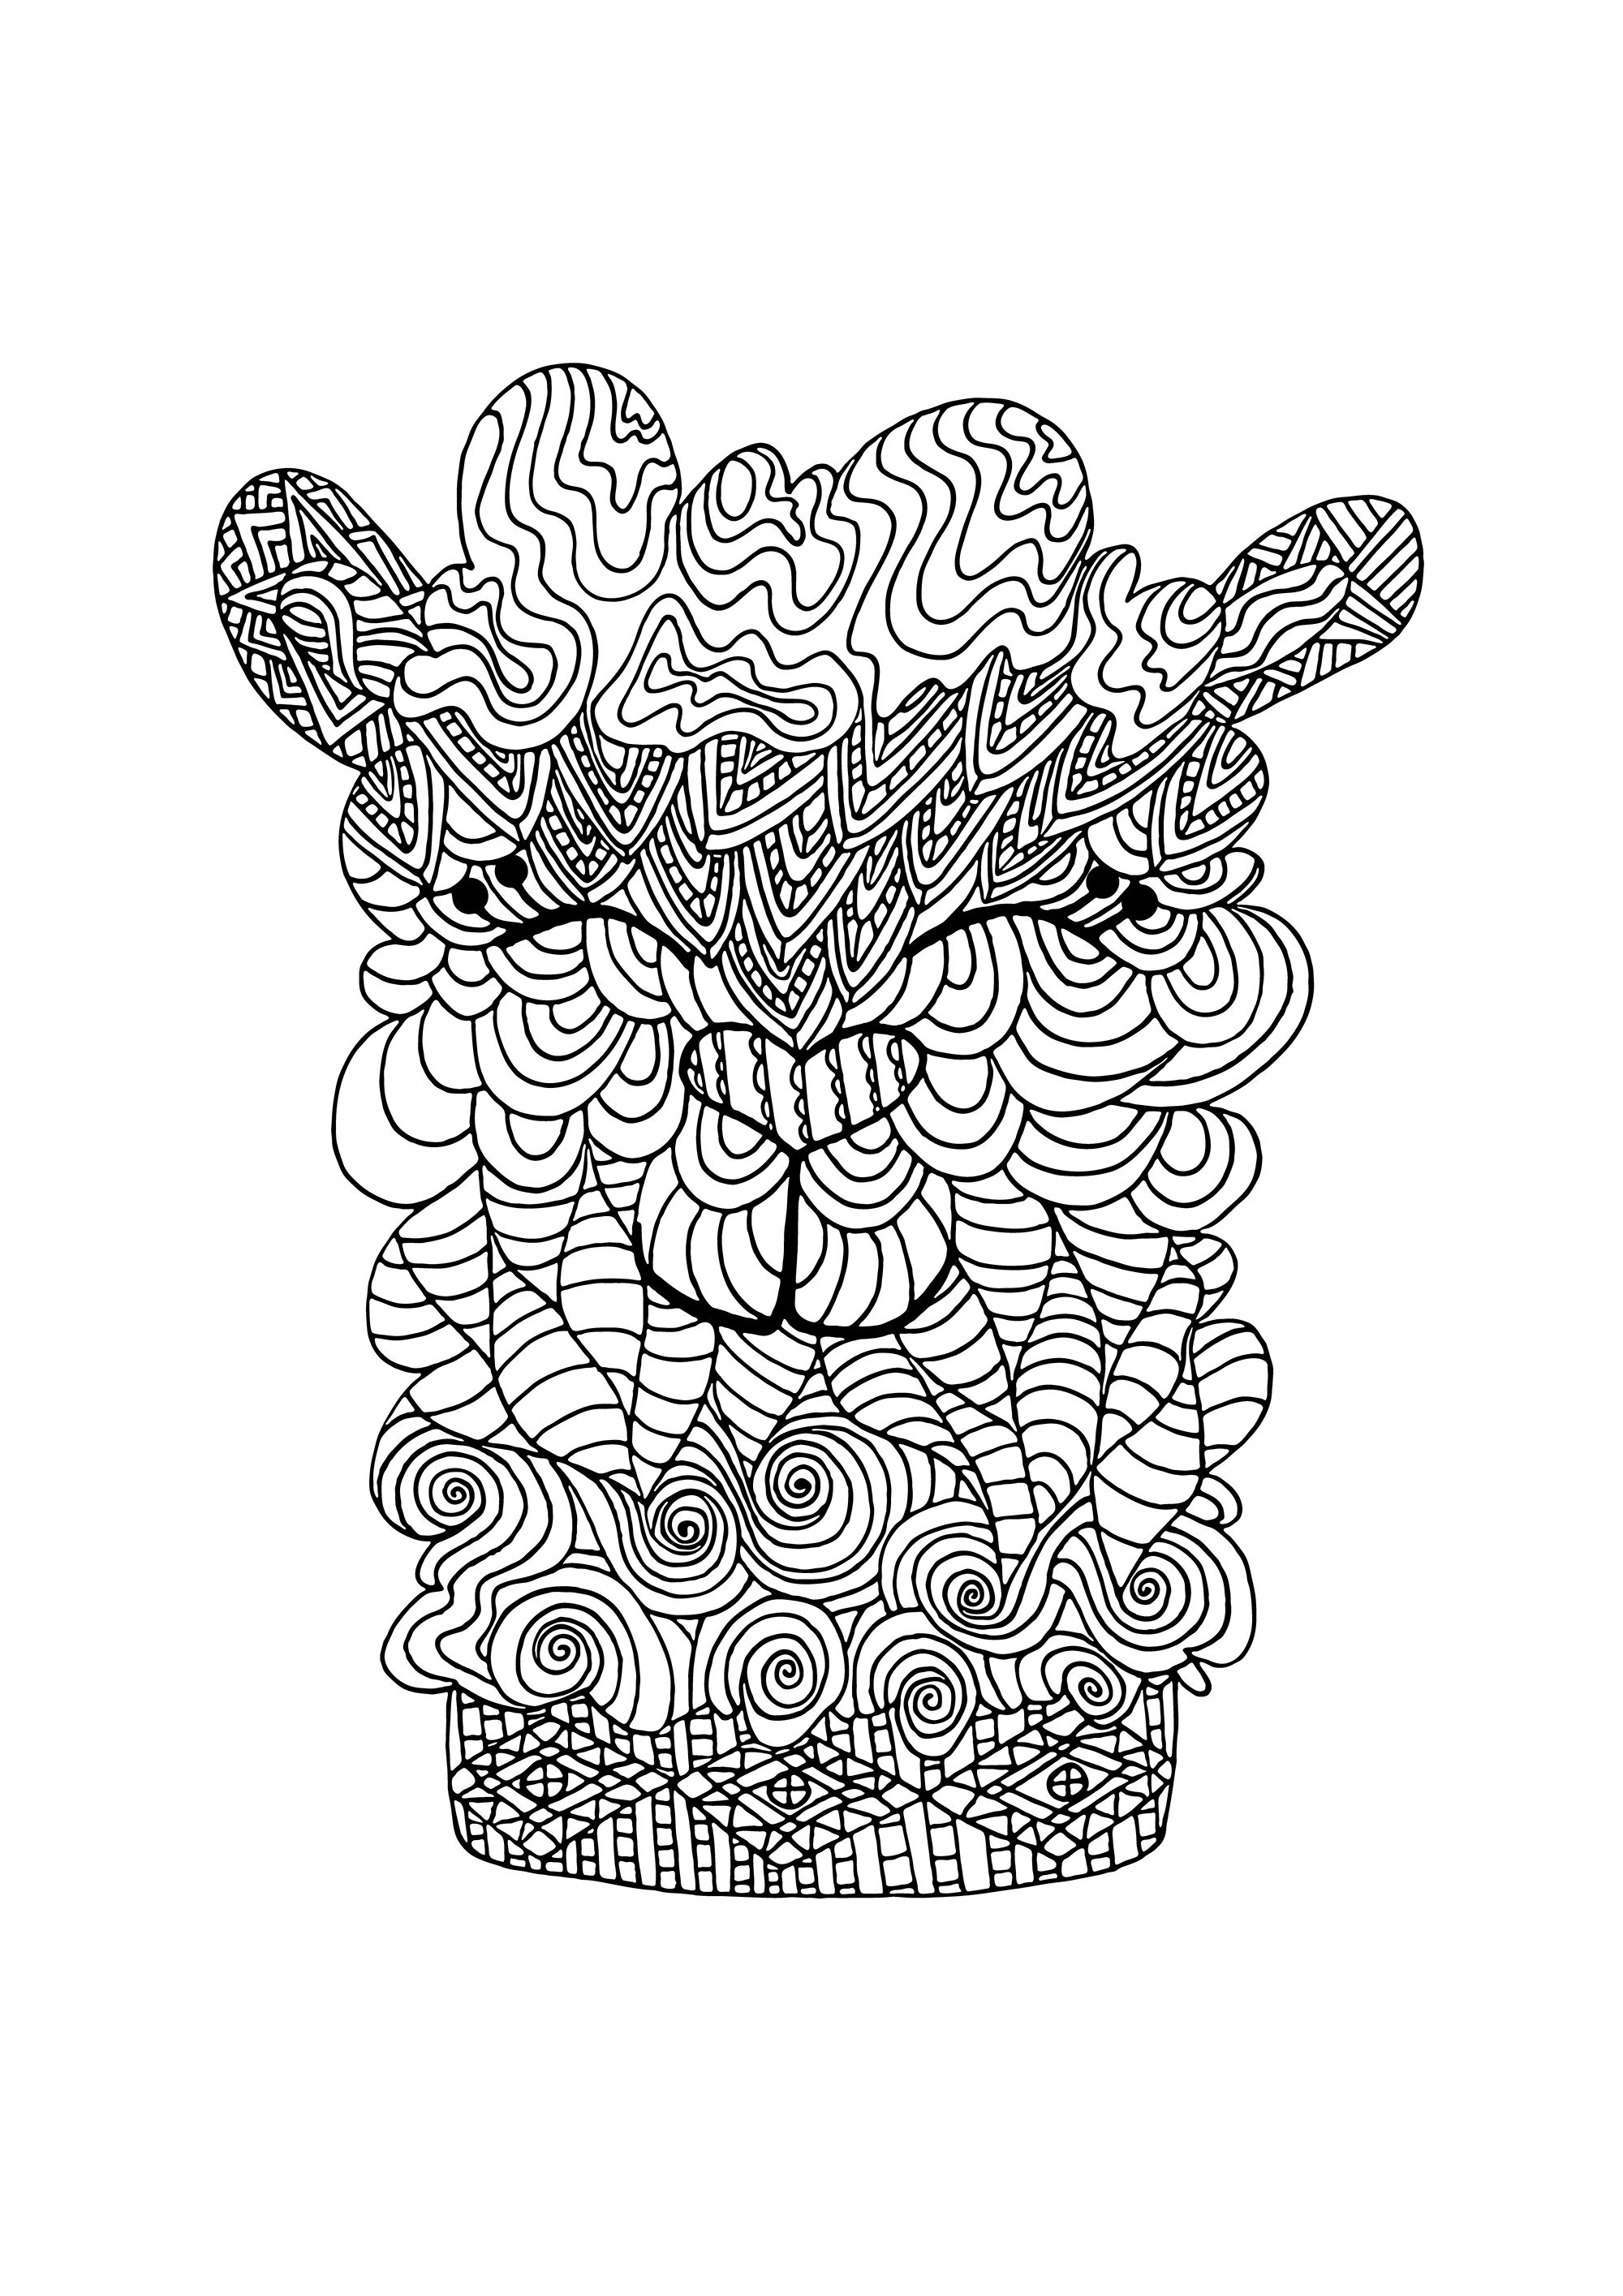 Animal pdf coloring page for adults digital doodle coloring pages by artpandashop